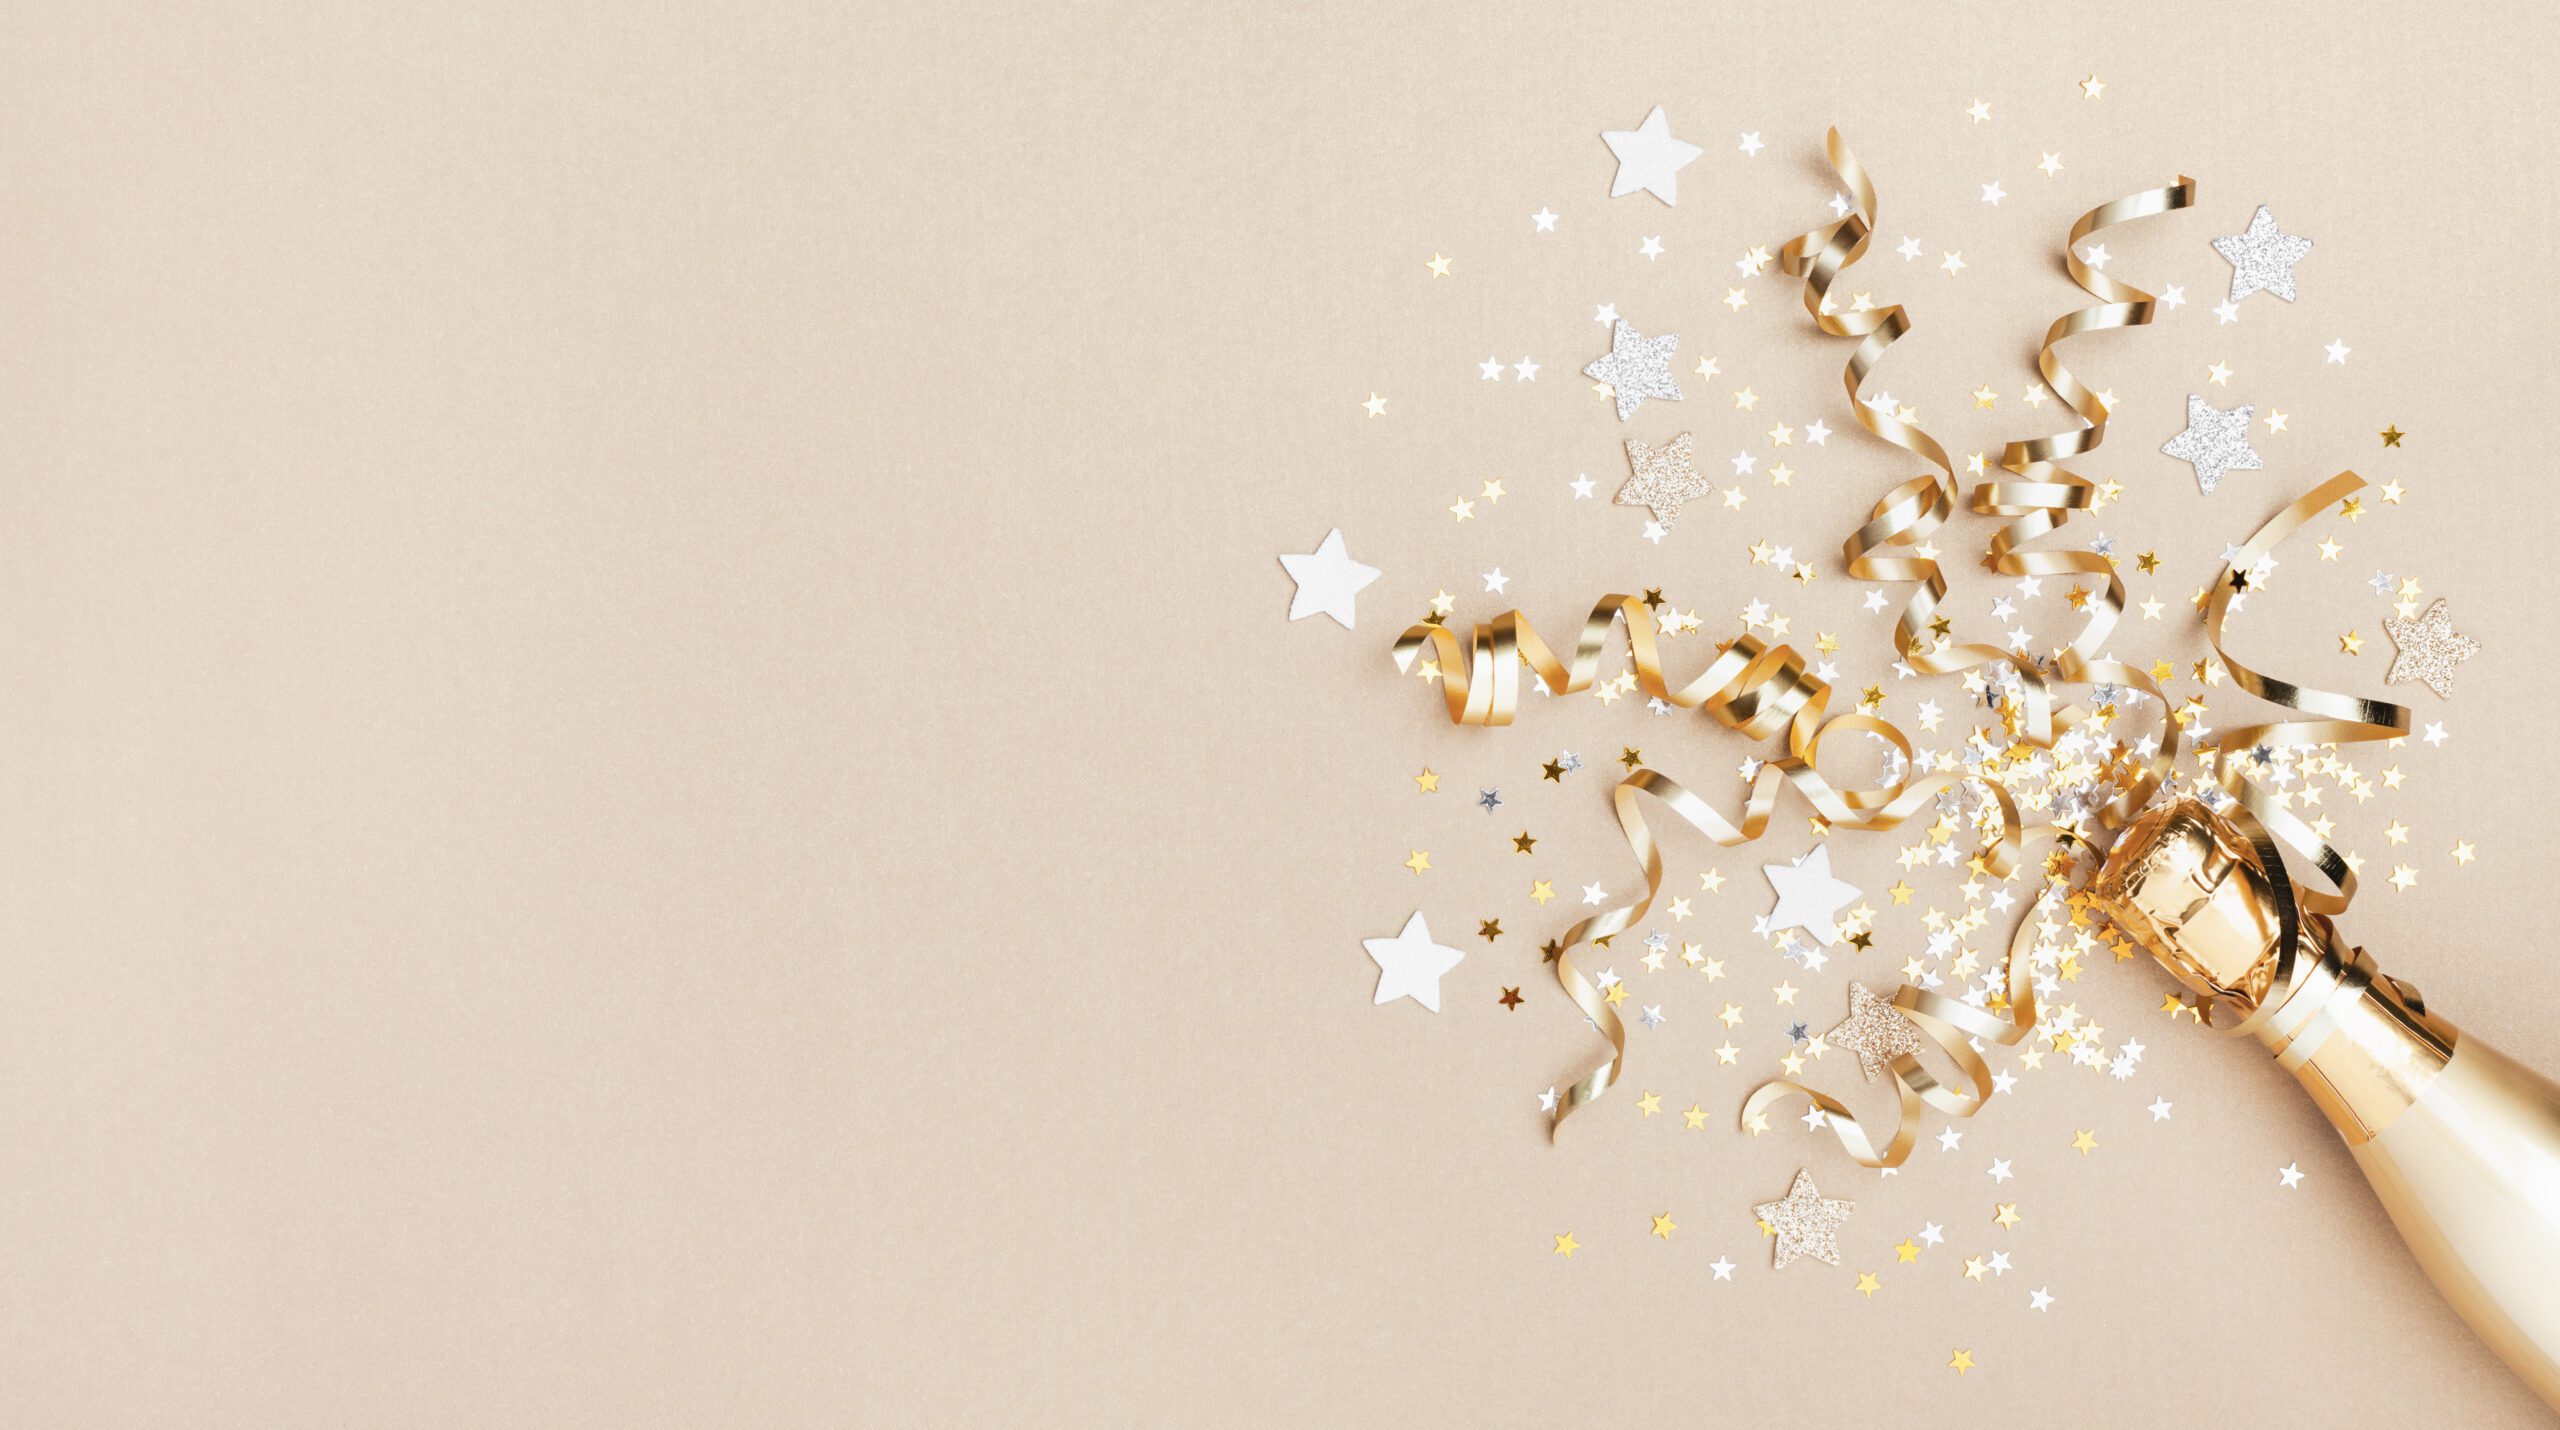 Celebration background with golden champagne bottle, confetti stars and party streamers.